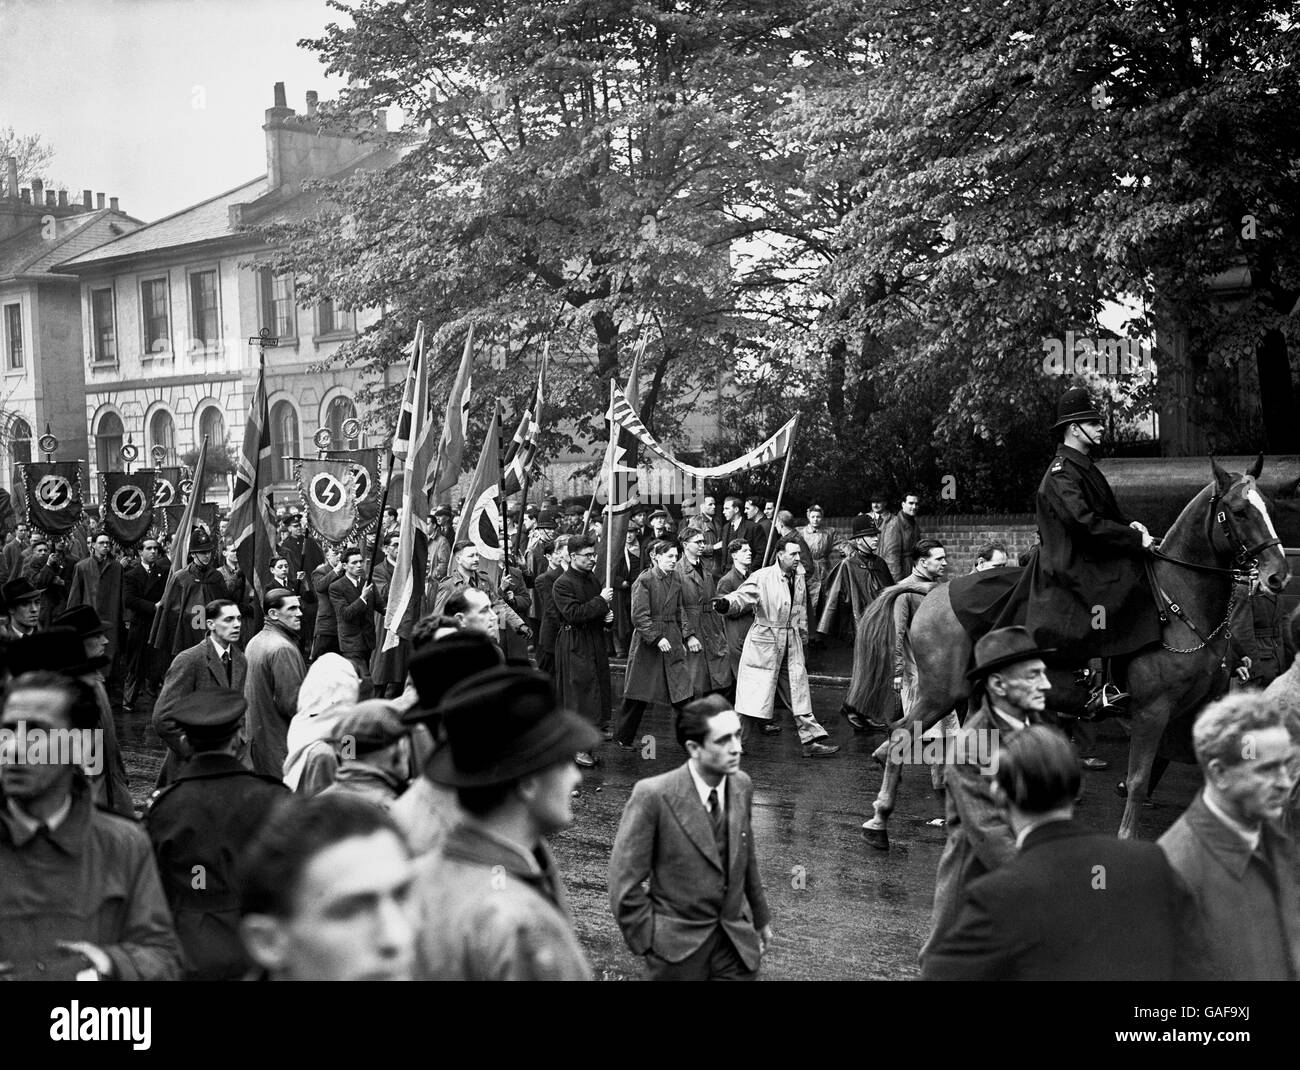 Sir Oswald Mosley supporters holding an open air May Day meeting. Police mingled with the crowds who formed to hear speakers, surrounded by Union Movement members carrying the movement's banner the white lightning flash on a red background. The Union Movement was recently founded by Mosley and several ex -members of the British Union of Fascists and has a more Pan-European outlook as it seeks to bring about a European Super-power to balance the threat from the USSR and the USA. Stock Photo